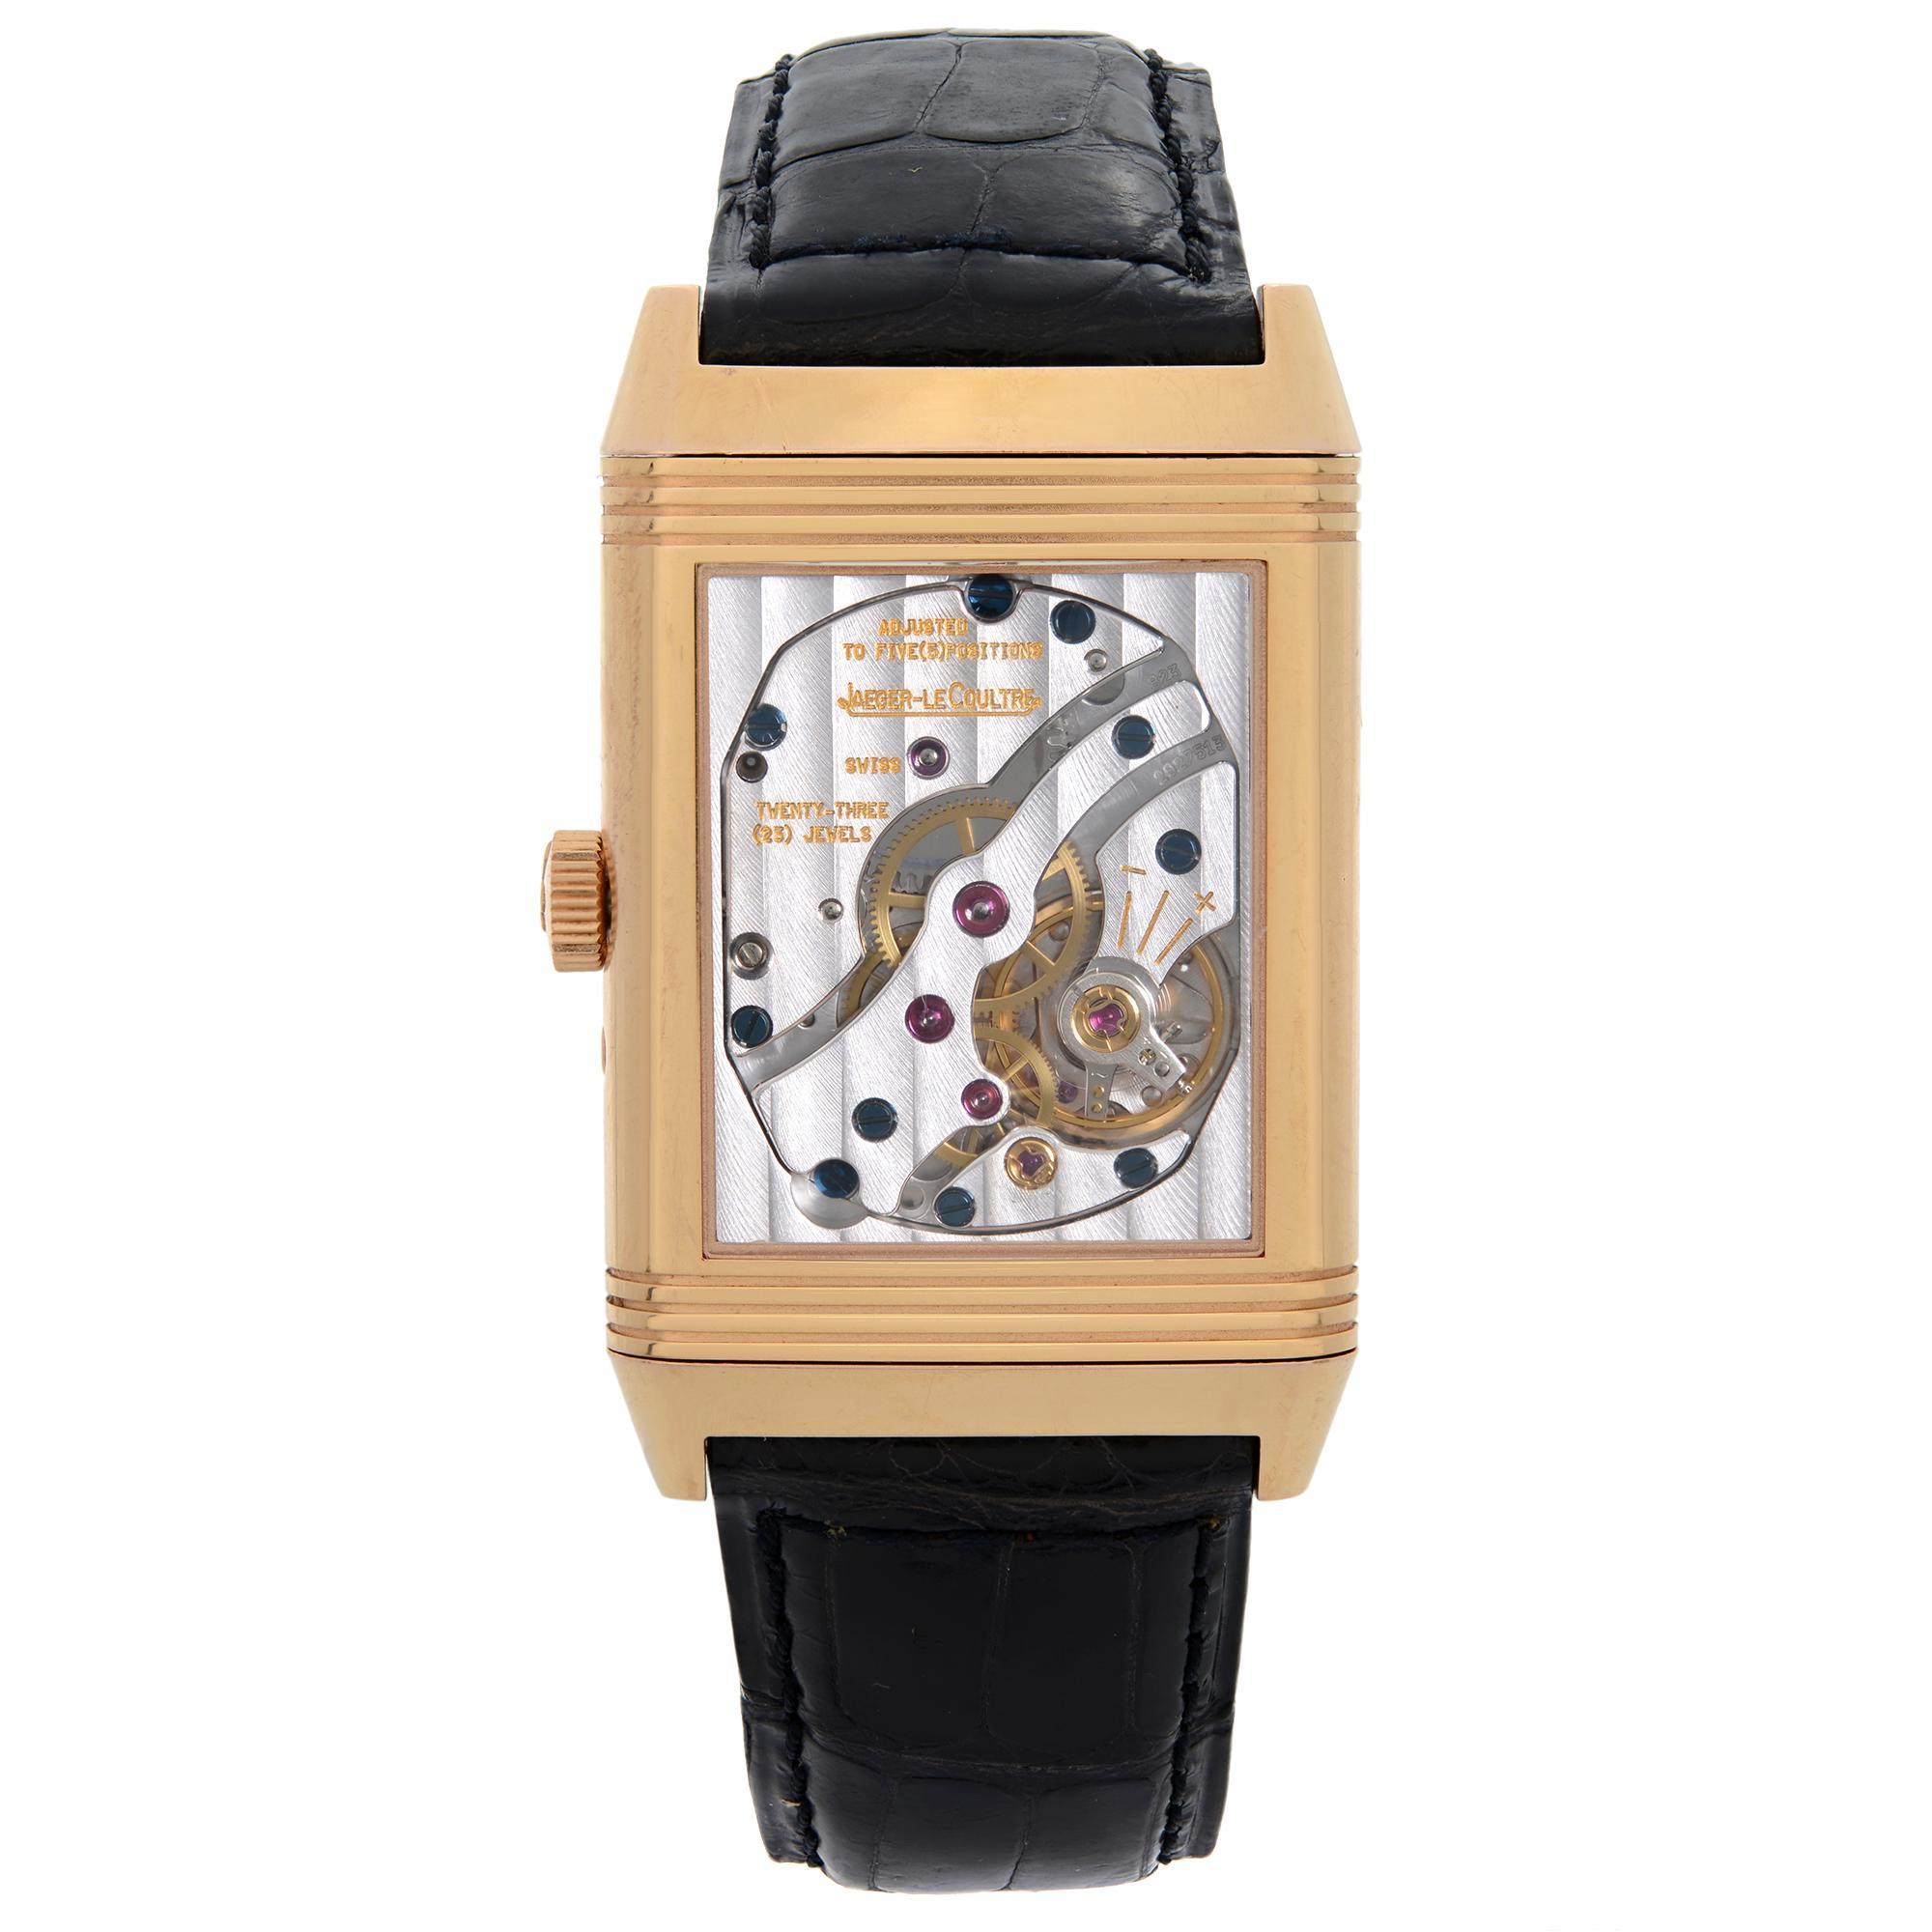 Jaeger-LeCoultre Reverso 18k Rose Gold Silver Dial Manual Wind Watch 270.2.63 2